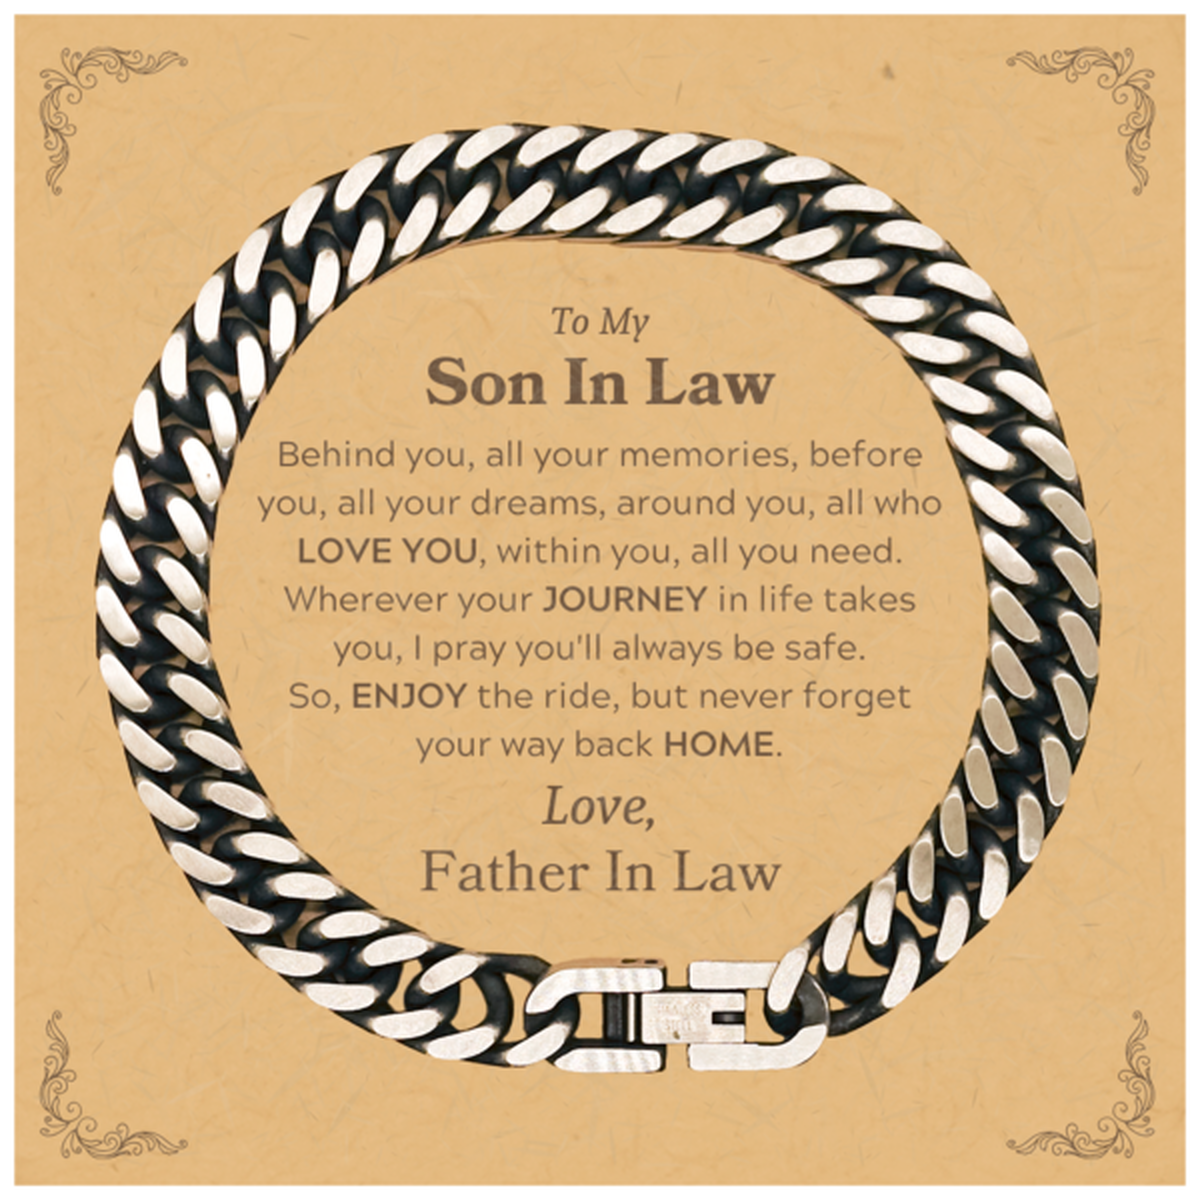 To My Son In Law Graduation Gifts from Father In Law, Son In Law Cuban Link Chain Bracelet Christmas Birthday Gifts for Son In Law Behind you, all your memories, before you, all your dreams. Love, Father In Law